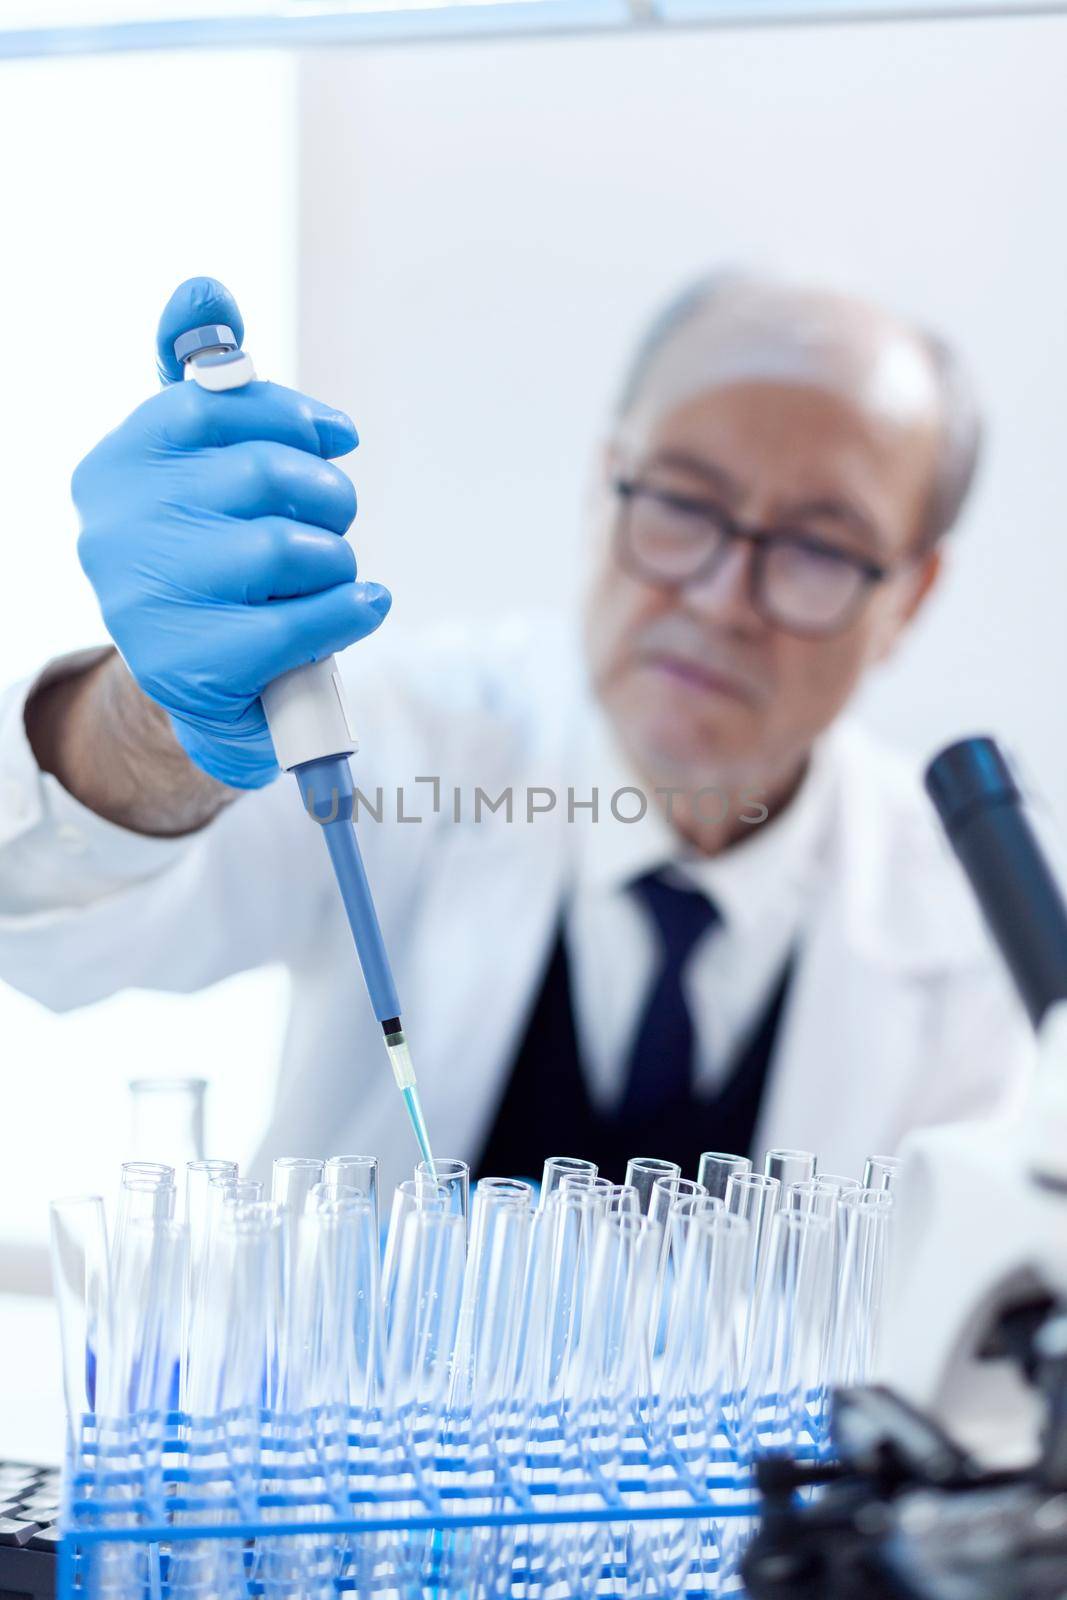 Scientist with protection gear using dropper pipette by DCStudio